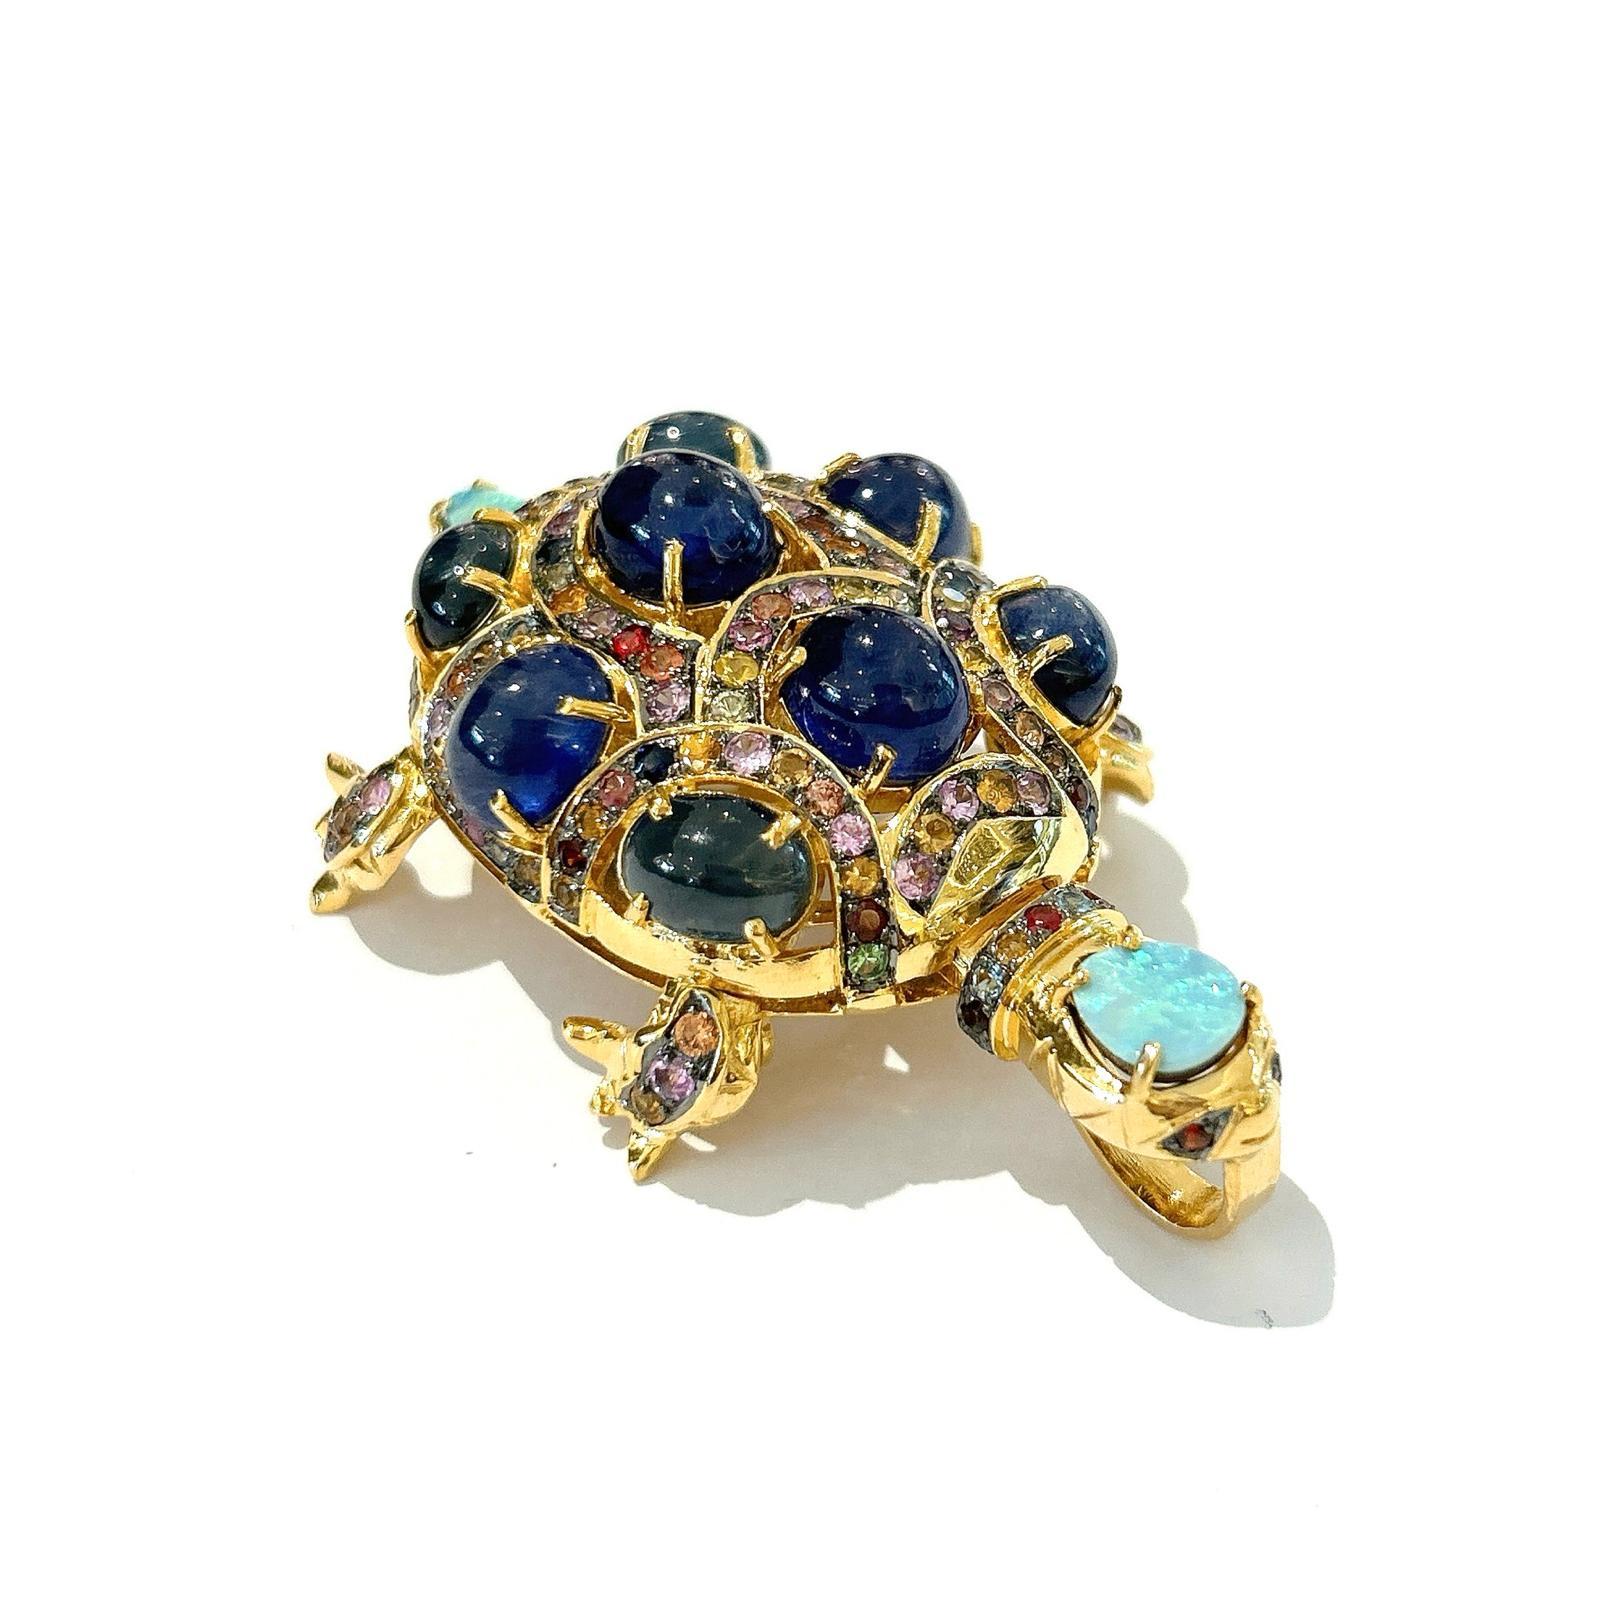 Bochic “Orient” Retro Multi Sapphires & Opal Brooch Set In 18K Gold & Silver 

Can be worn as a brooch and a pendant 

Blue color Natural Sapphires from Sri Lanka 
27 carat
Multi color Natural Sapphires from Sri Lanka 
5 carat 
Blue Opals 
0.50